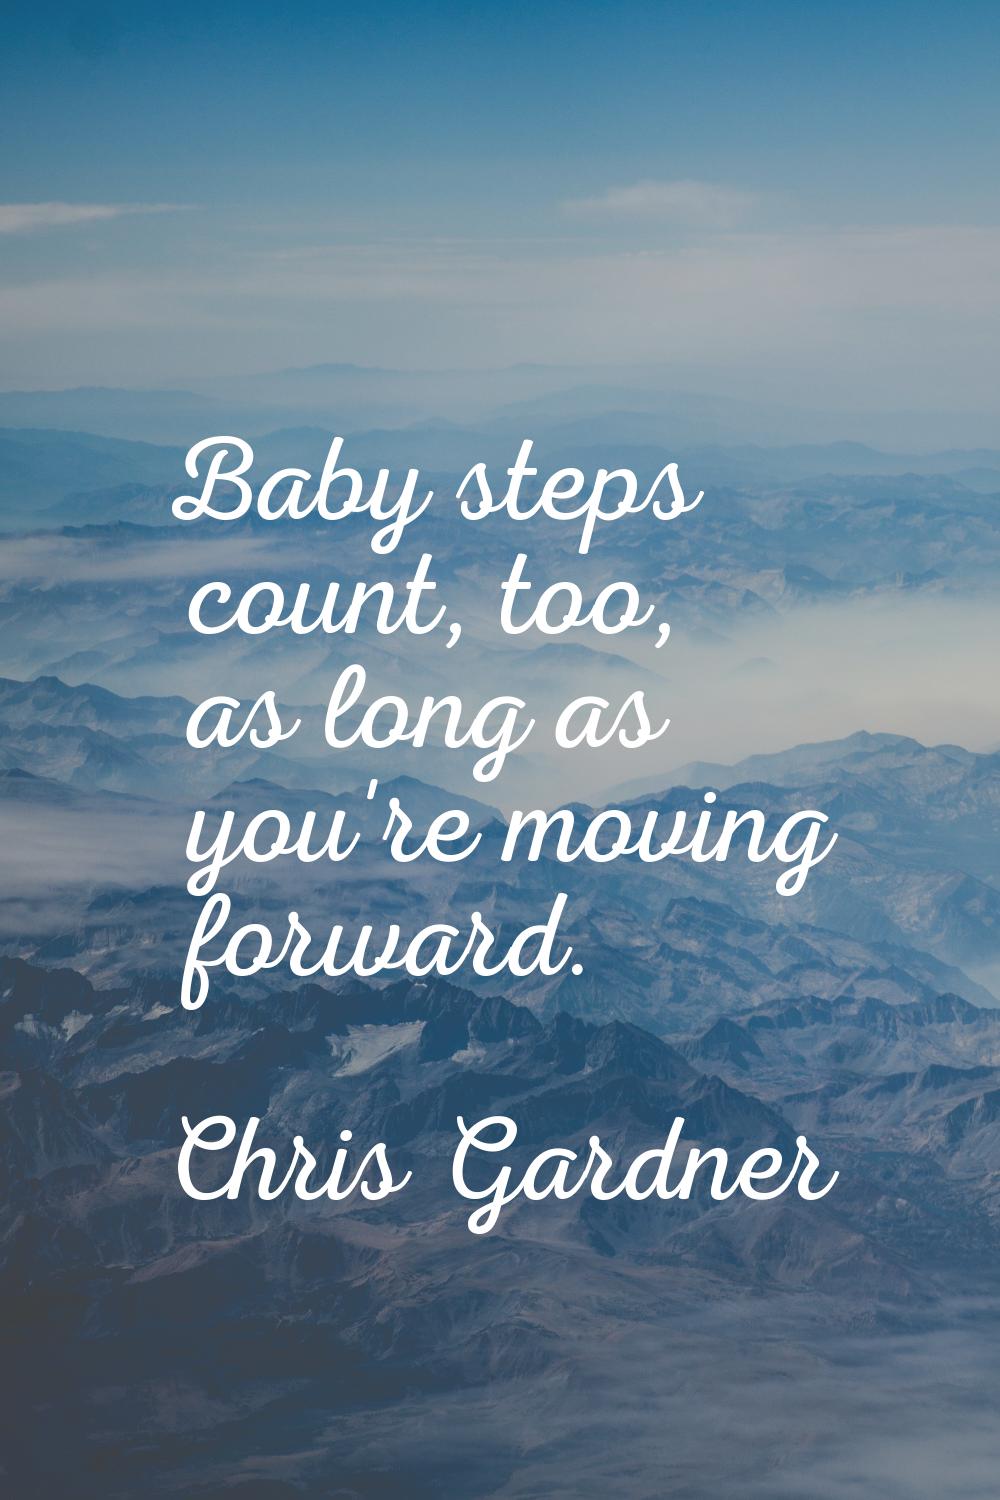 Baby steps count, too, as long as you're moving forward.